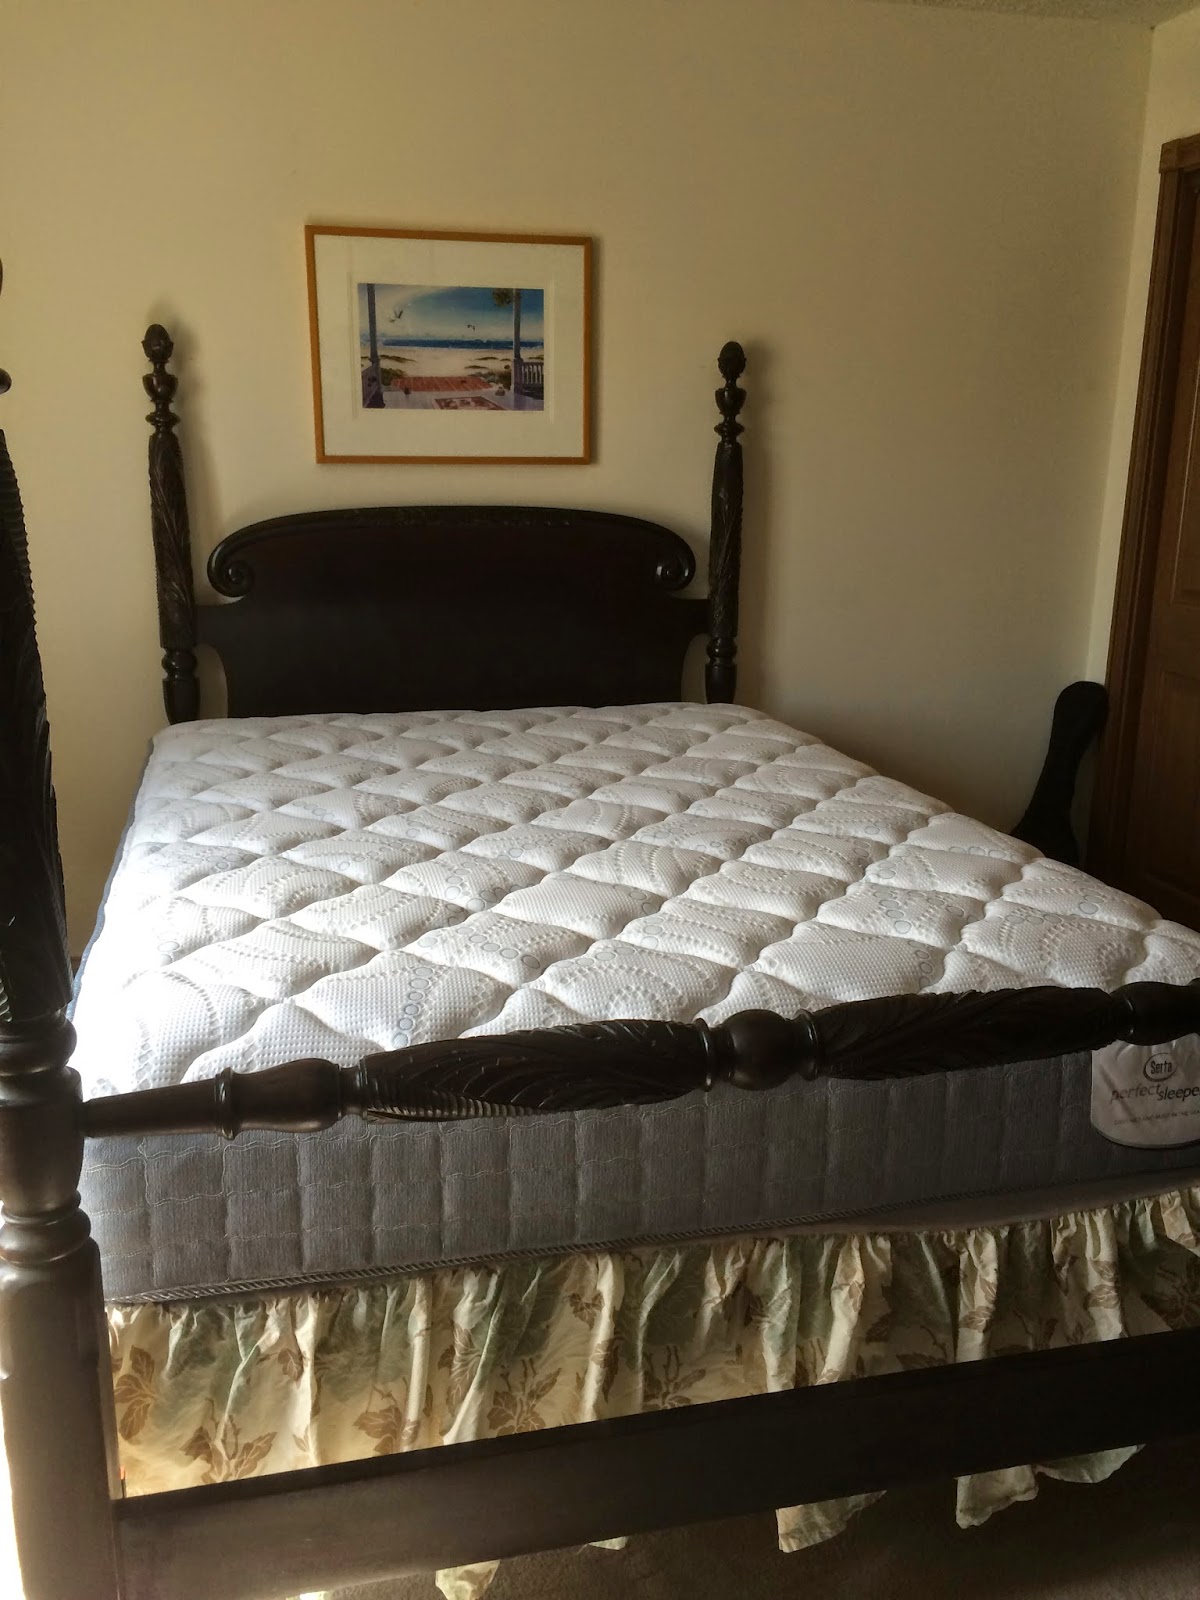 Converting Antique Bed To Queen Mattress, How To Turn A Full Bed Into Queen